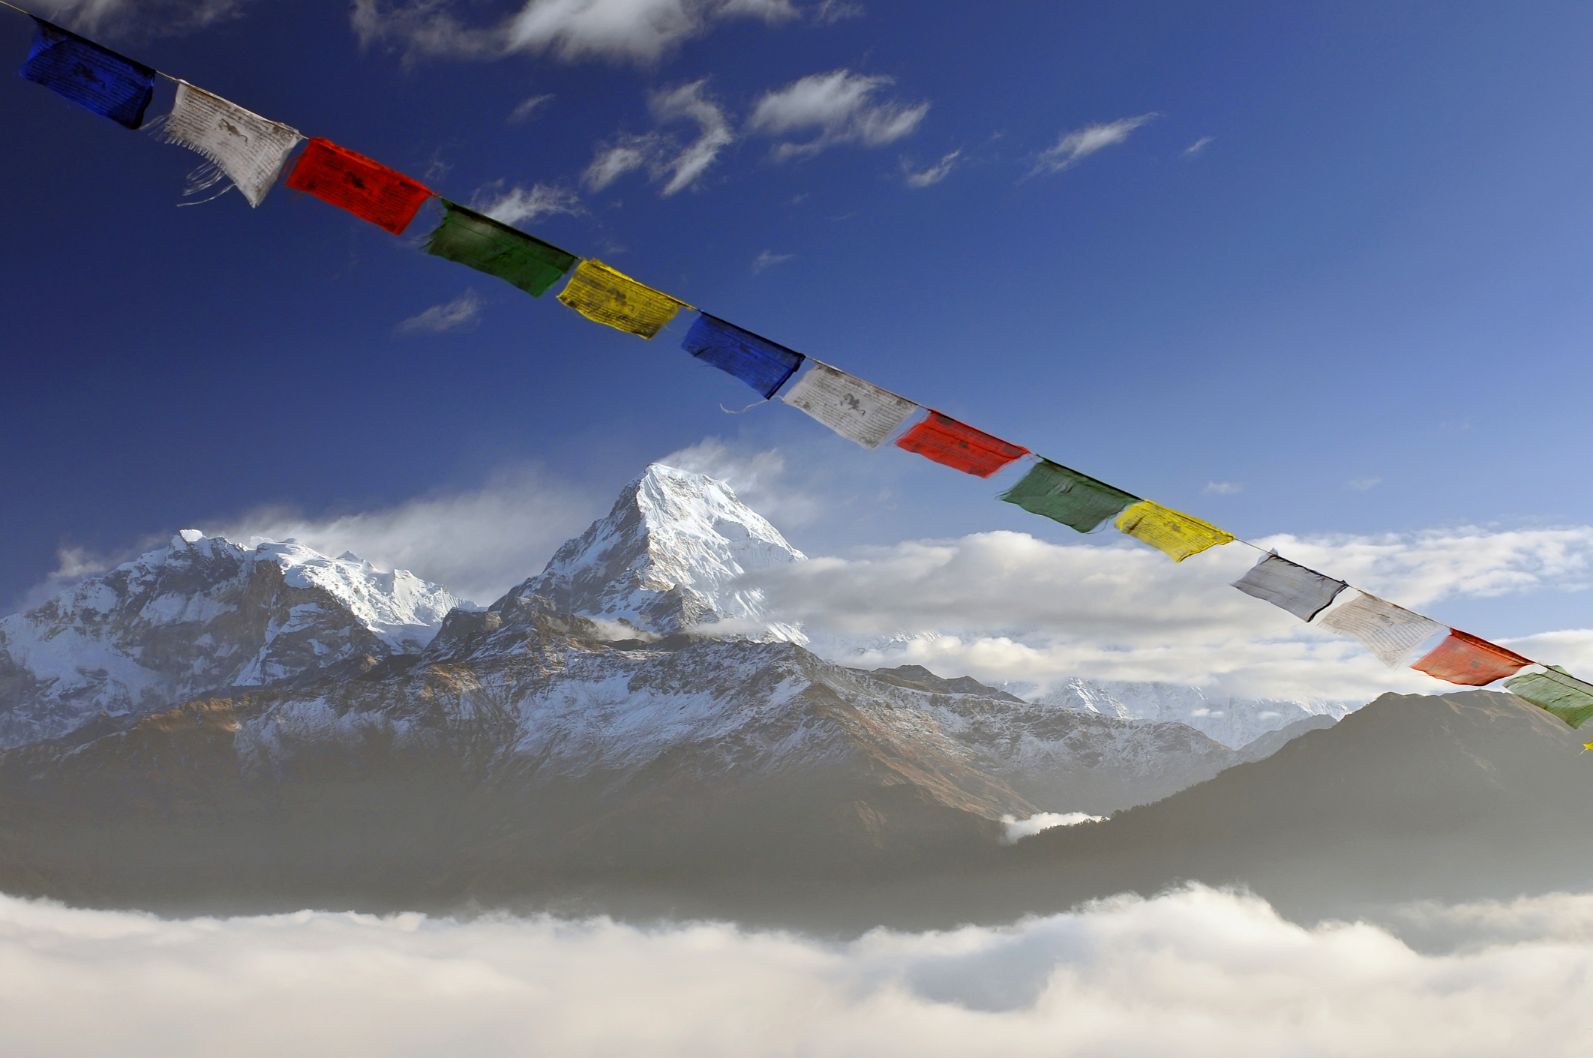 The Annapurna massif, with prayer flags in the foreground.